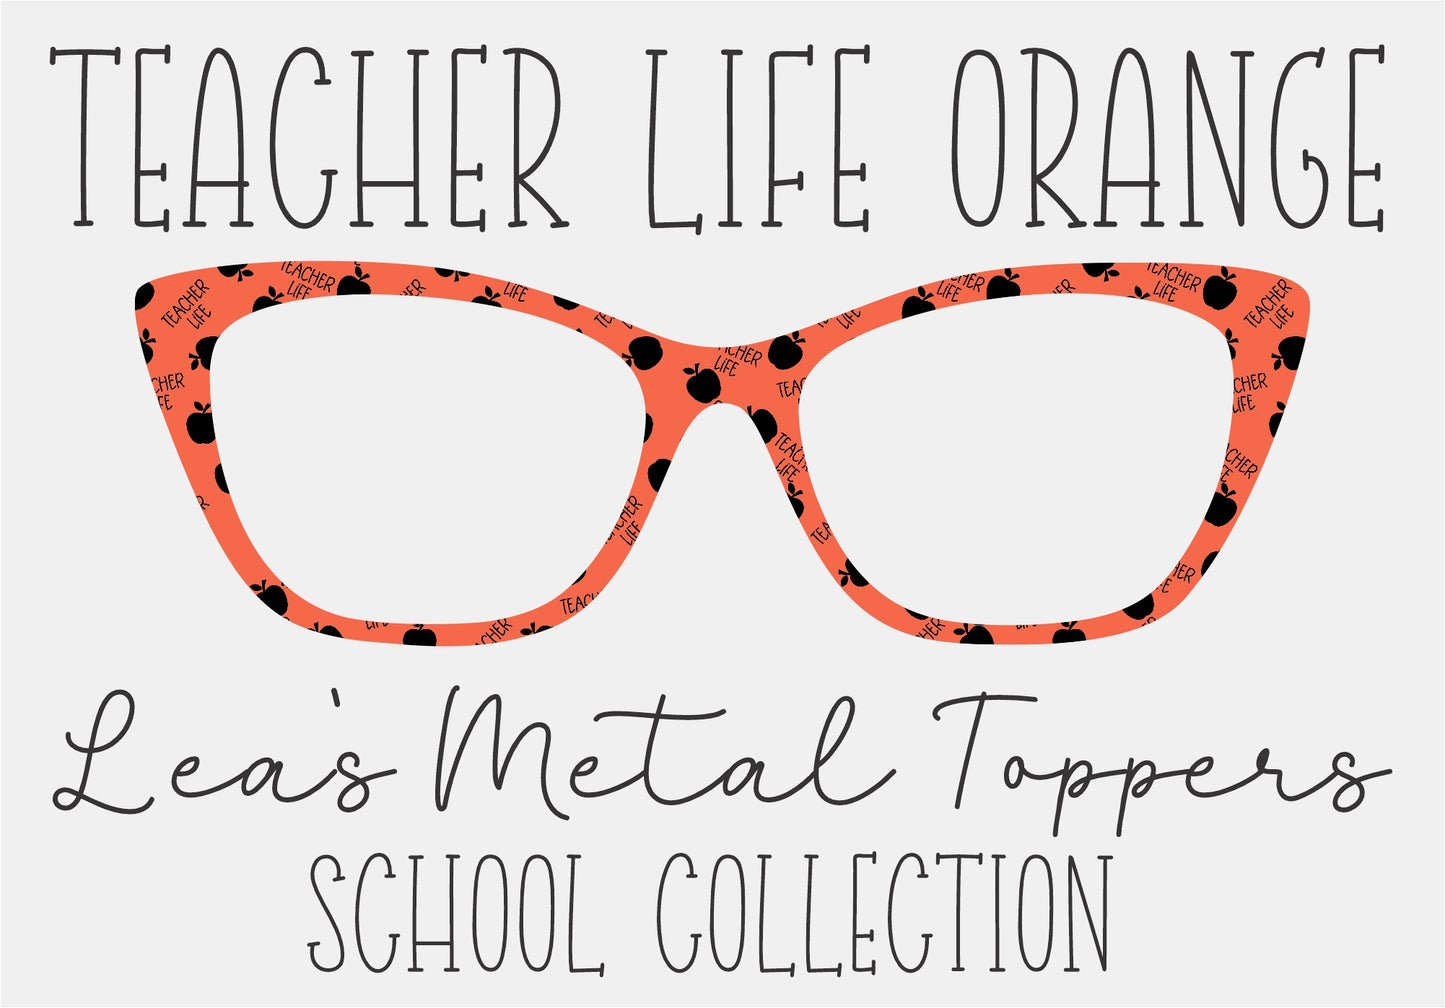 TEACHER LIFE ORANGE Eyewear Frame Toppers COMES WITH MAGNETS